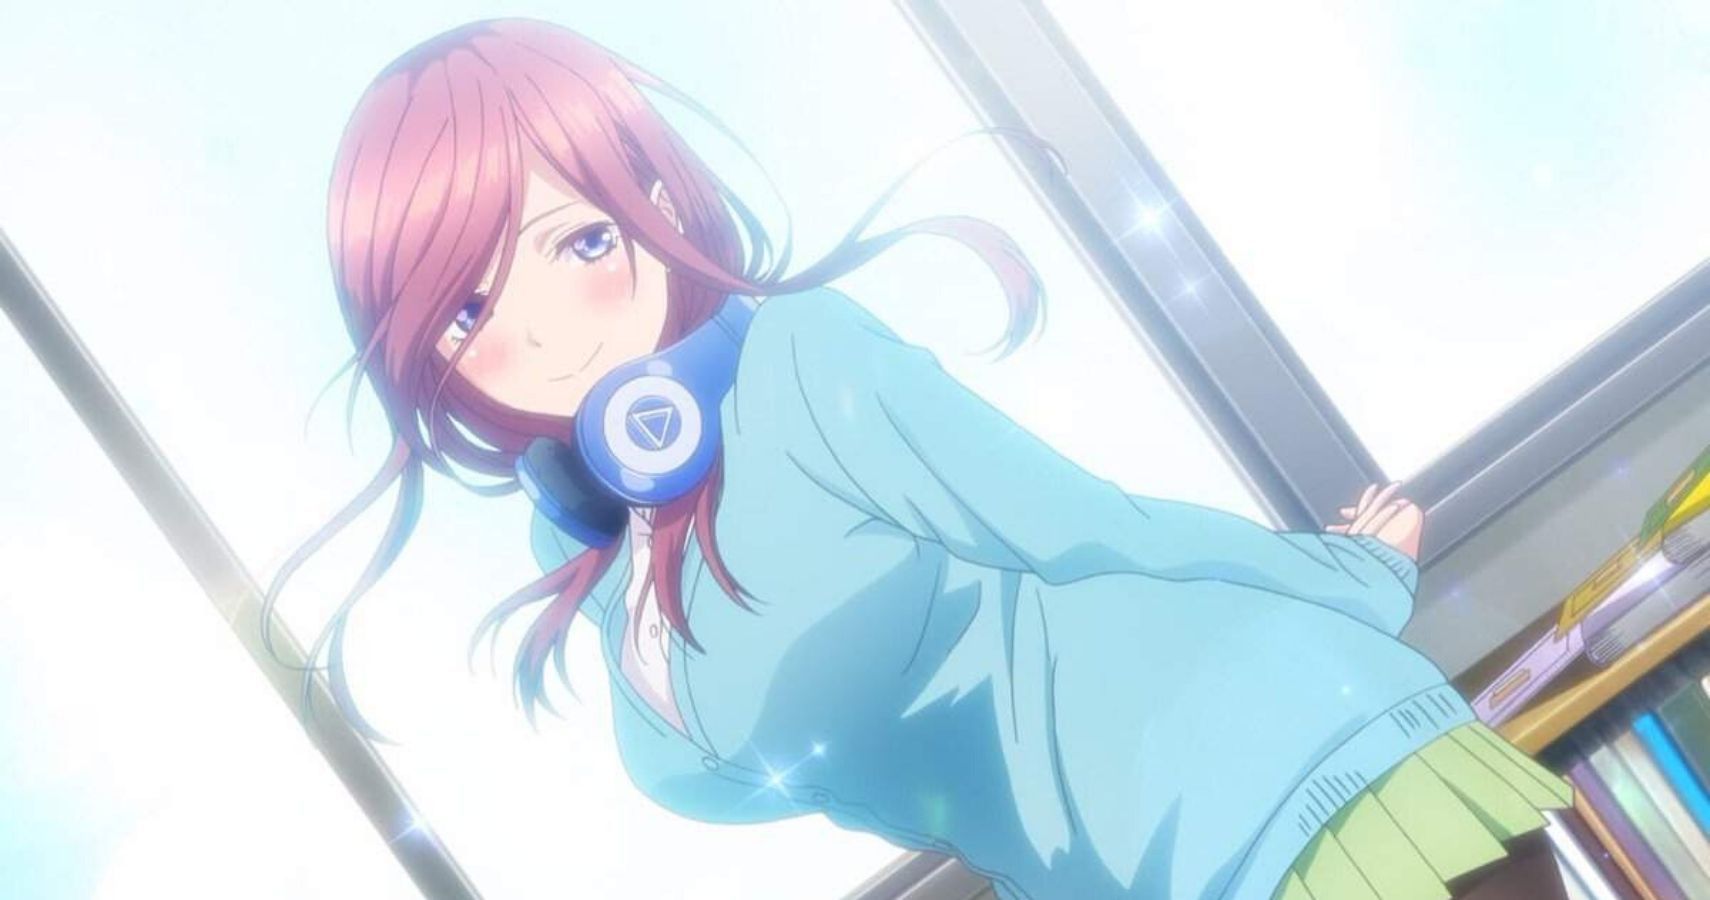 Miku Nakano Route (Full) Game: The Quintessential Quintuplets